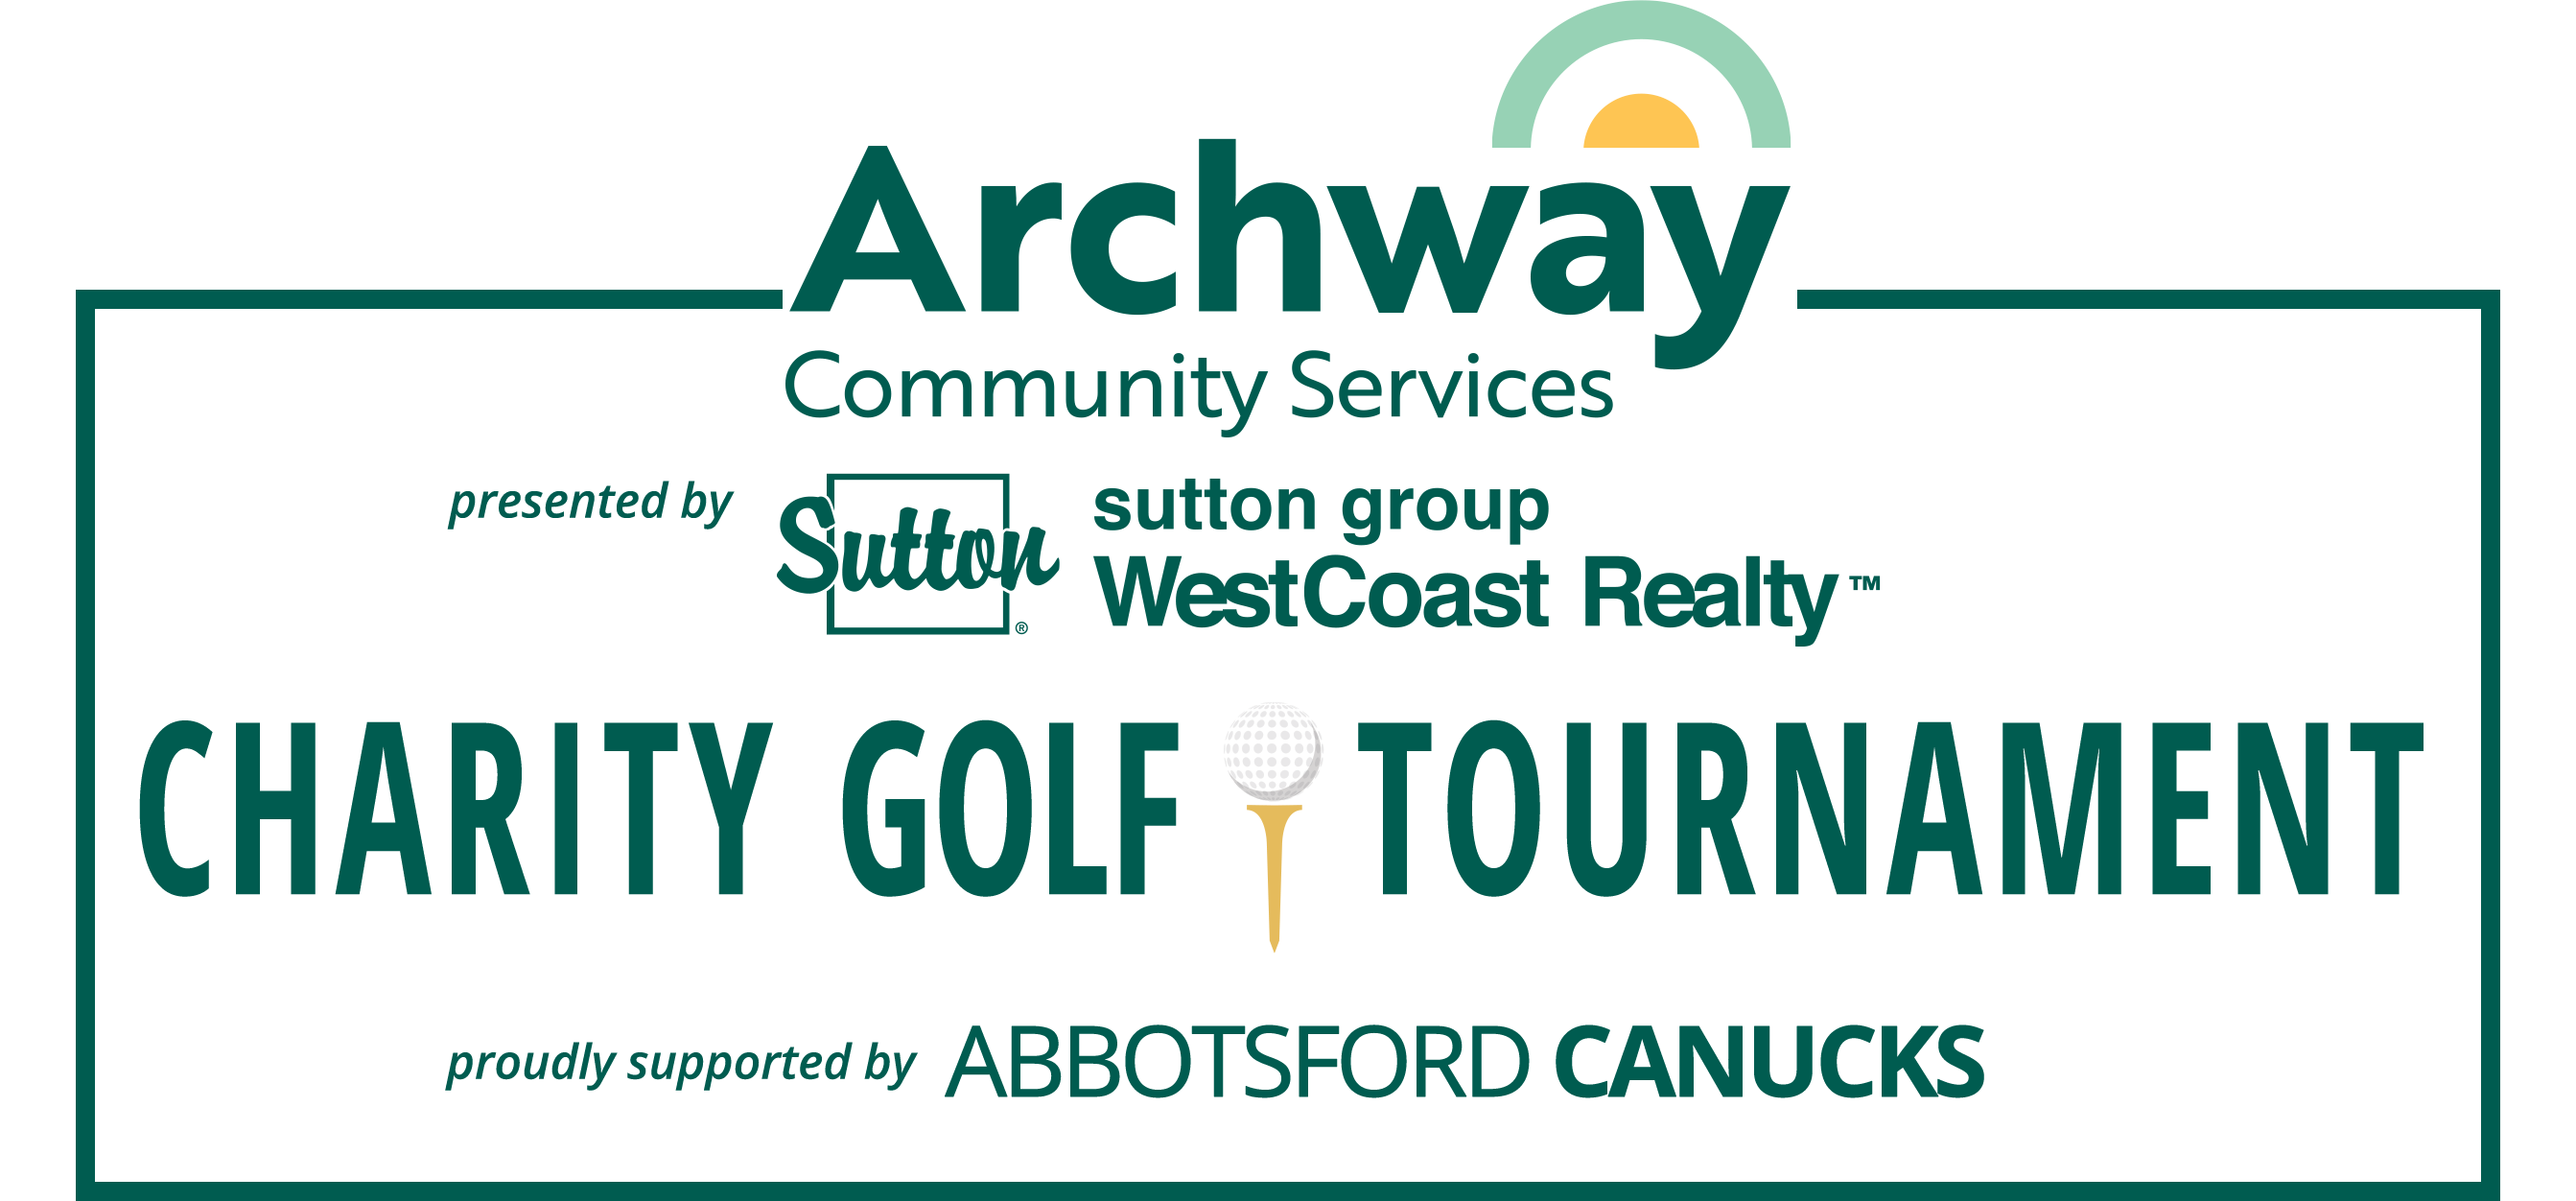 Archway Community Services Golf Tournament